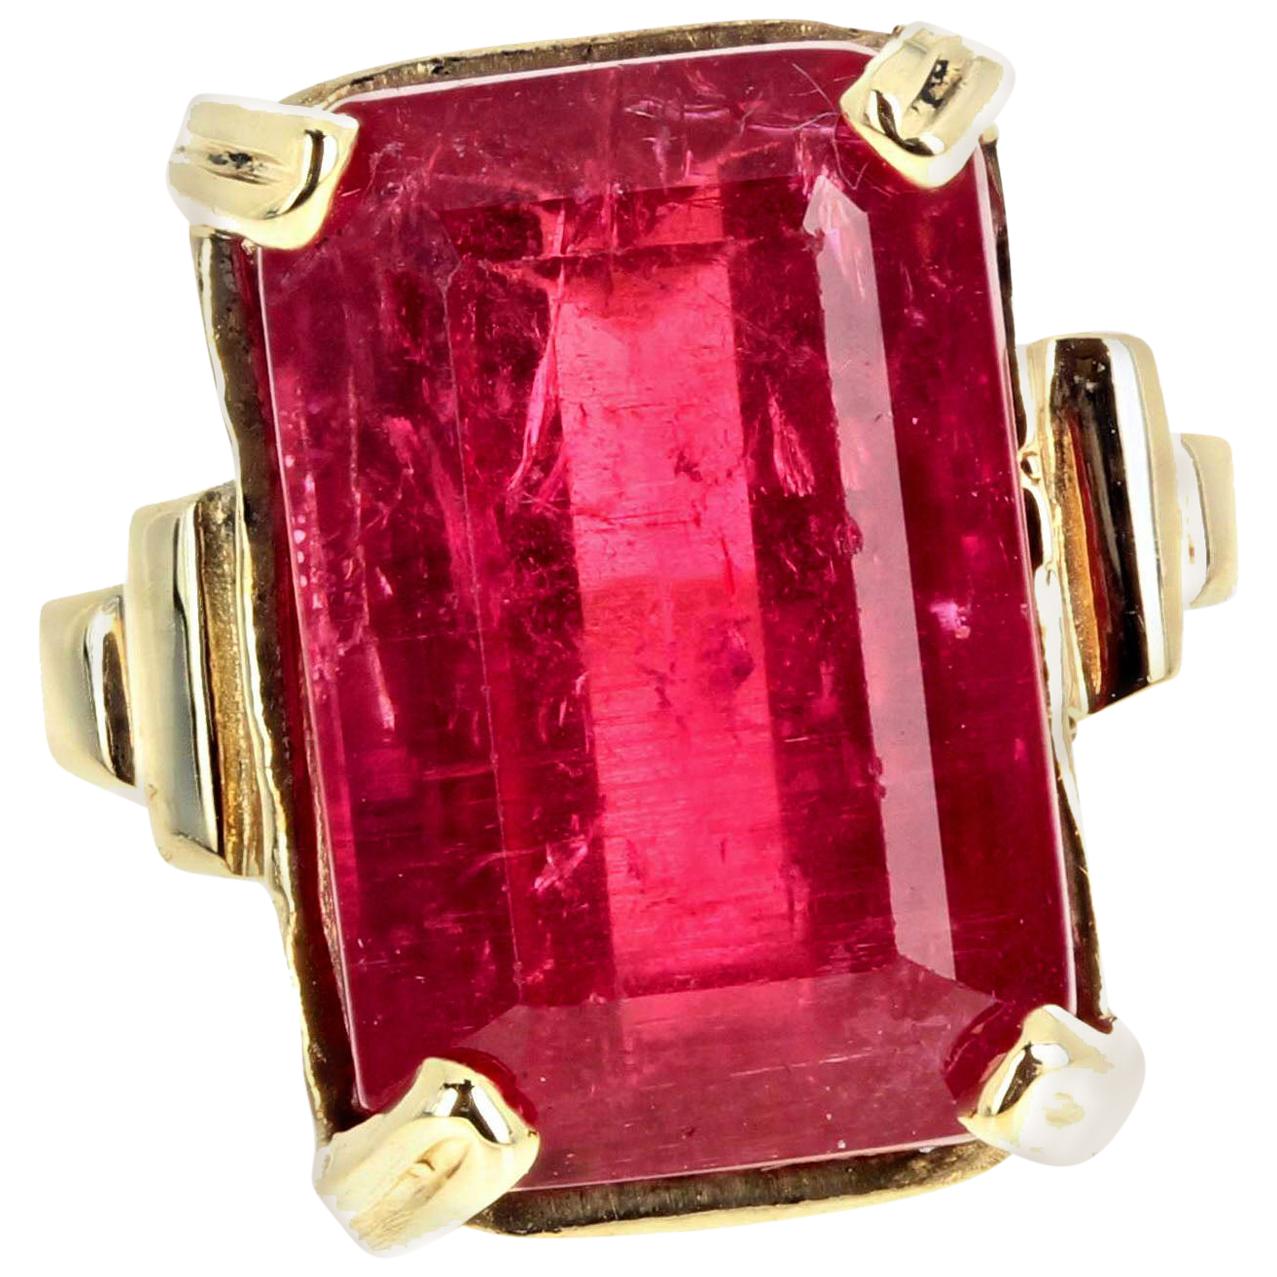 AJD Intensely Glowing 8.5Cts Red Real Tourmaline Gold Ring